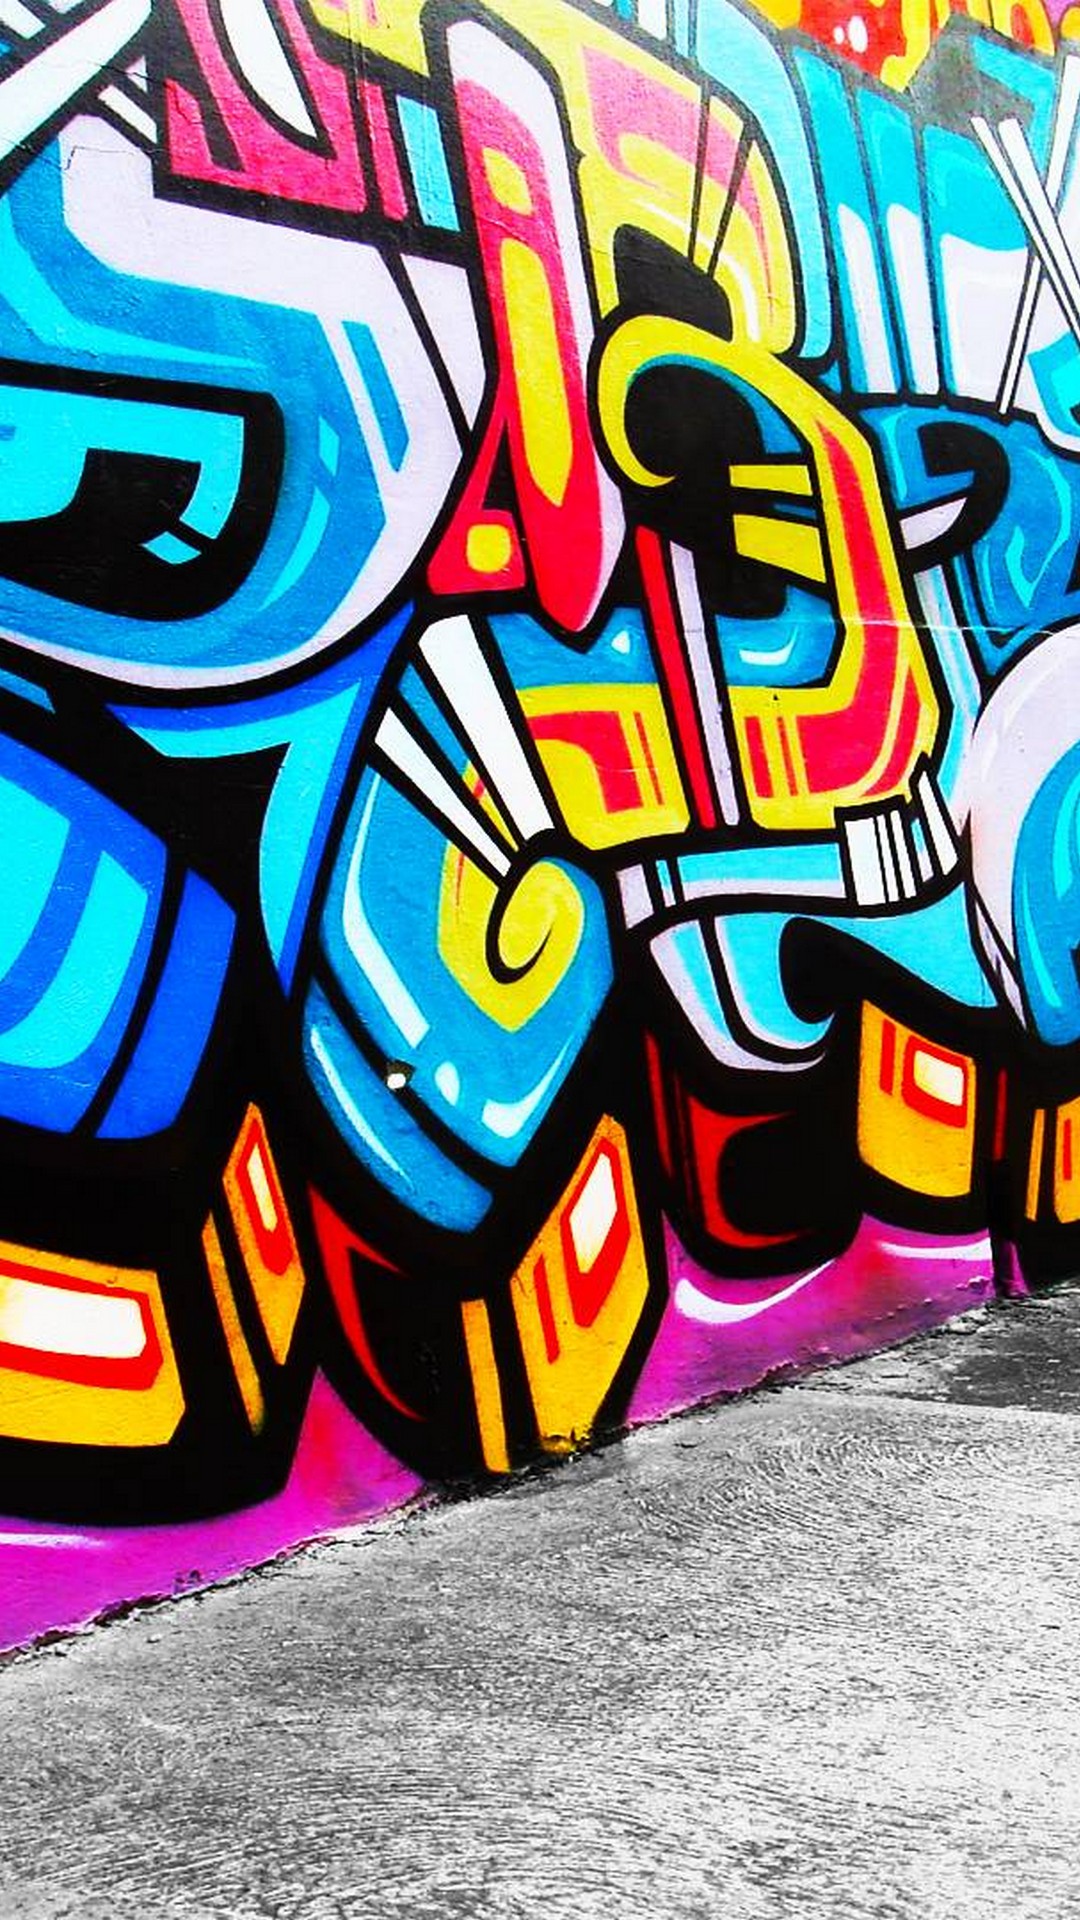 Graffiti Mobile Wallpaper HD with image resolution 1080x1920 pixel. You can make this wallpaper for your Desktop Computer Backgrounds, Mac Wallpapers, Android Lock screen or iPhone Screensavers